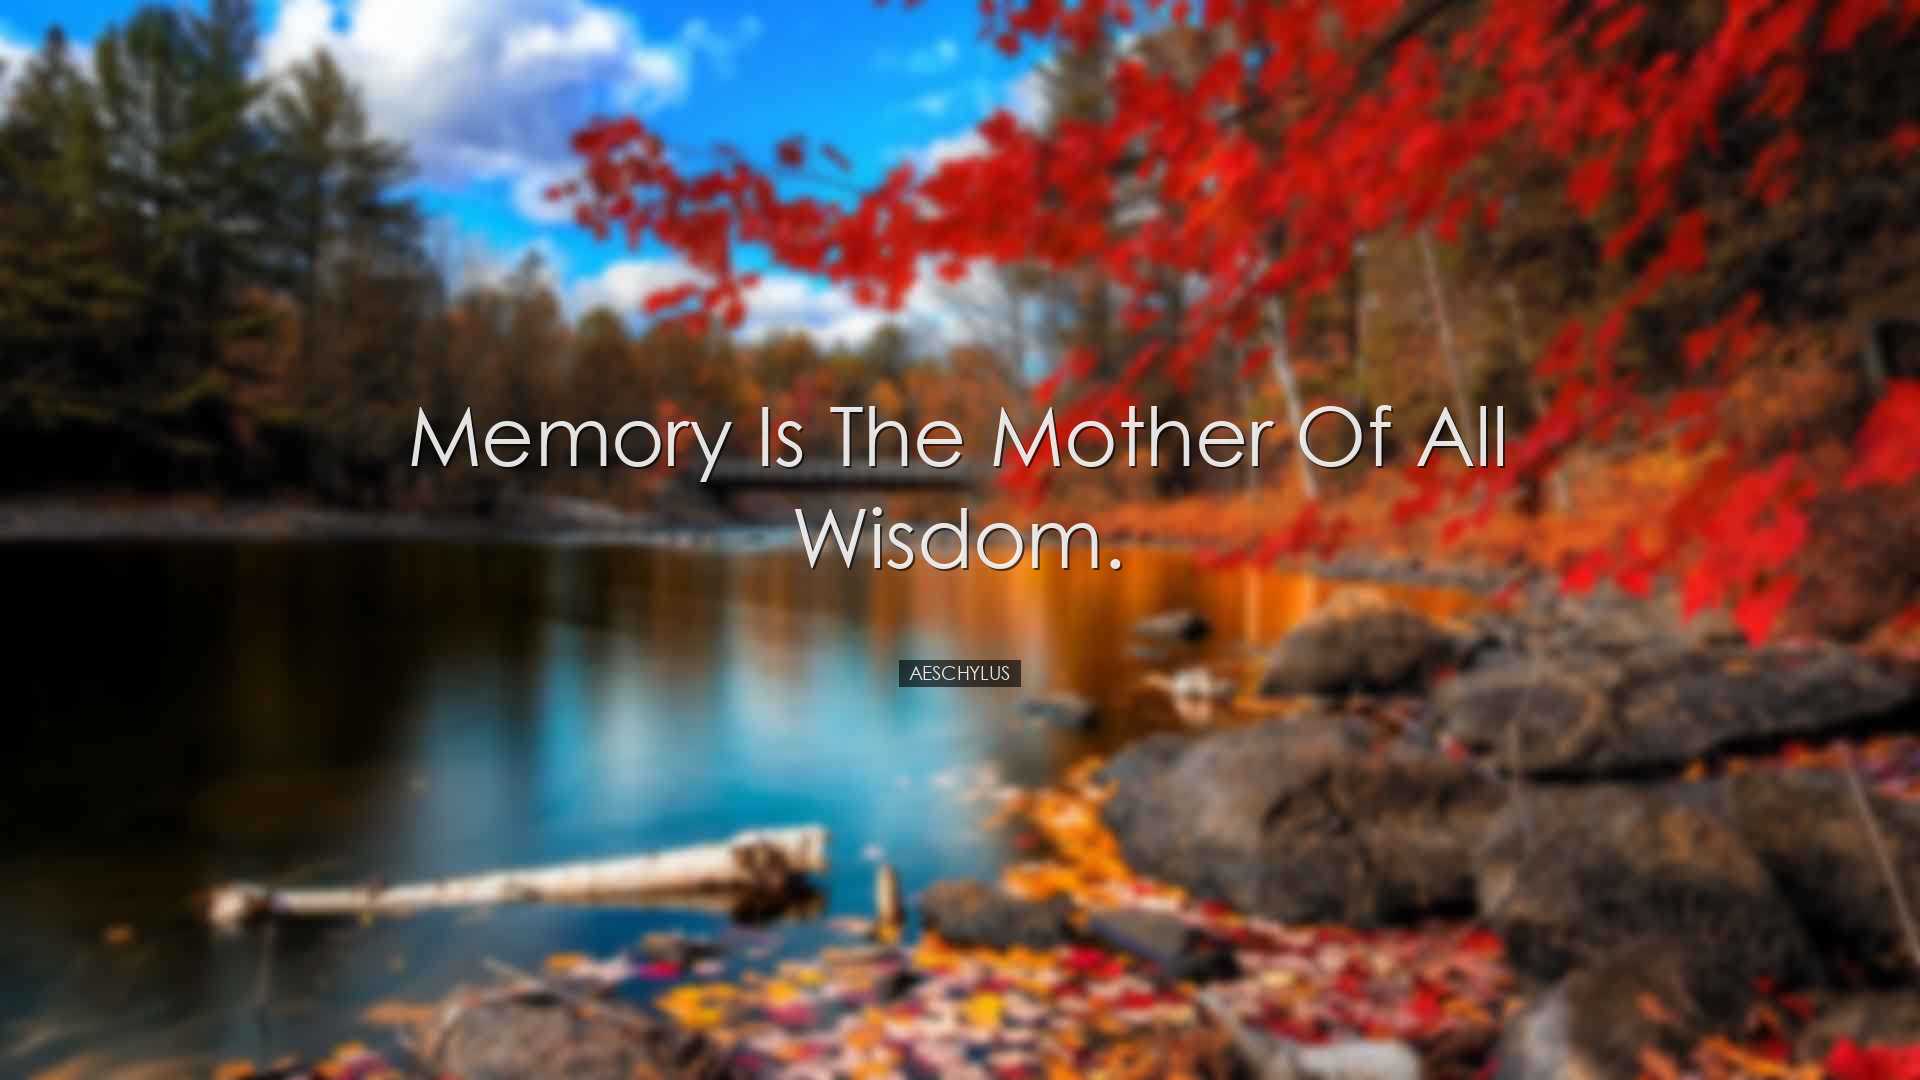 Memory is the mother of all wisdom. - Aeschylus